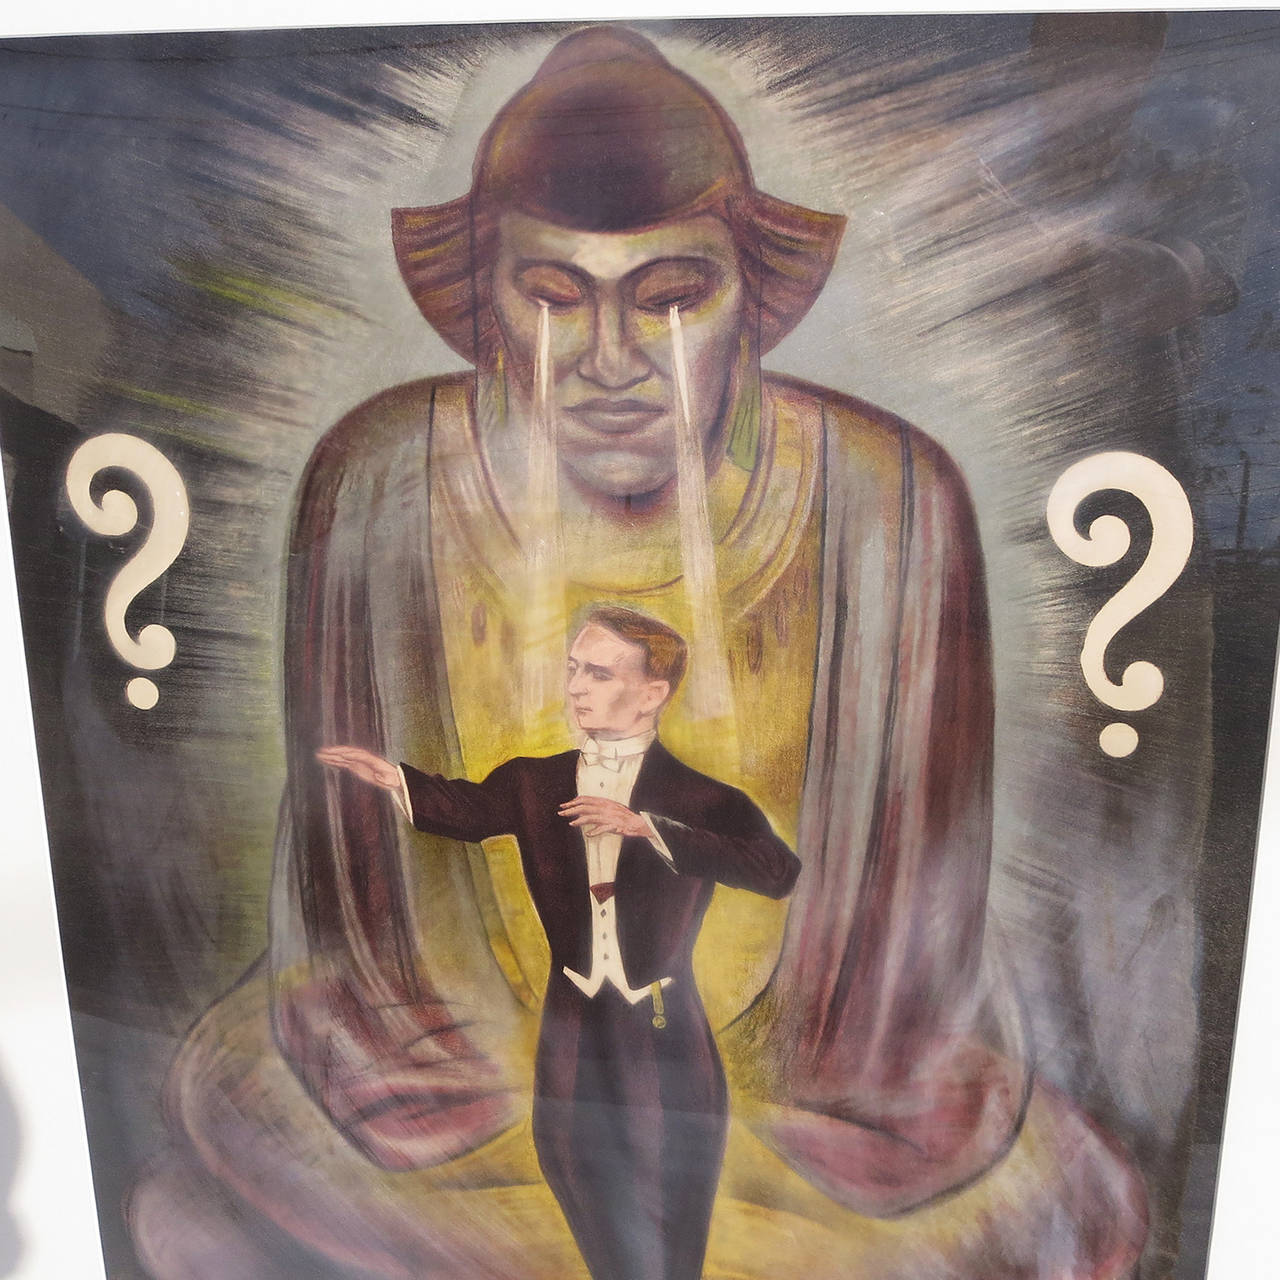 A very captivating image of a solo magician in the fixed gaze of a Buddha - like figure. The mystery is compounded by the pair of question marks on either side. The poster is done in a stone lithograph form, more commonly used in the late 19th -